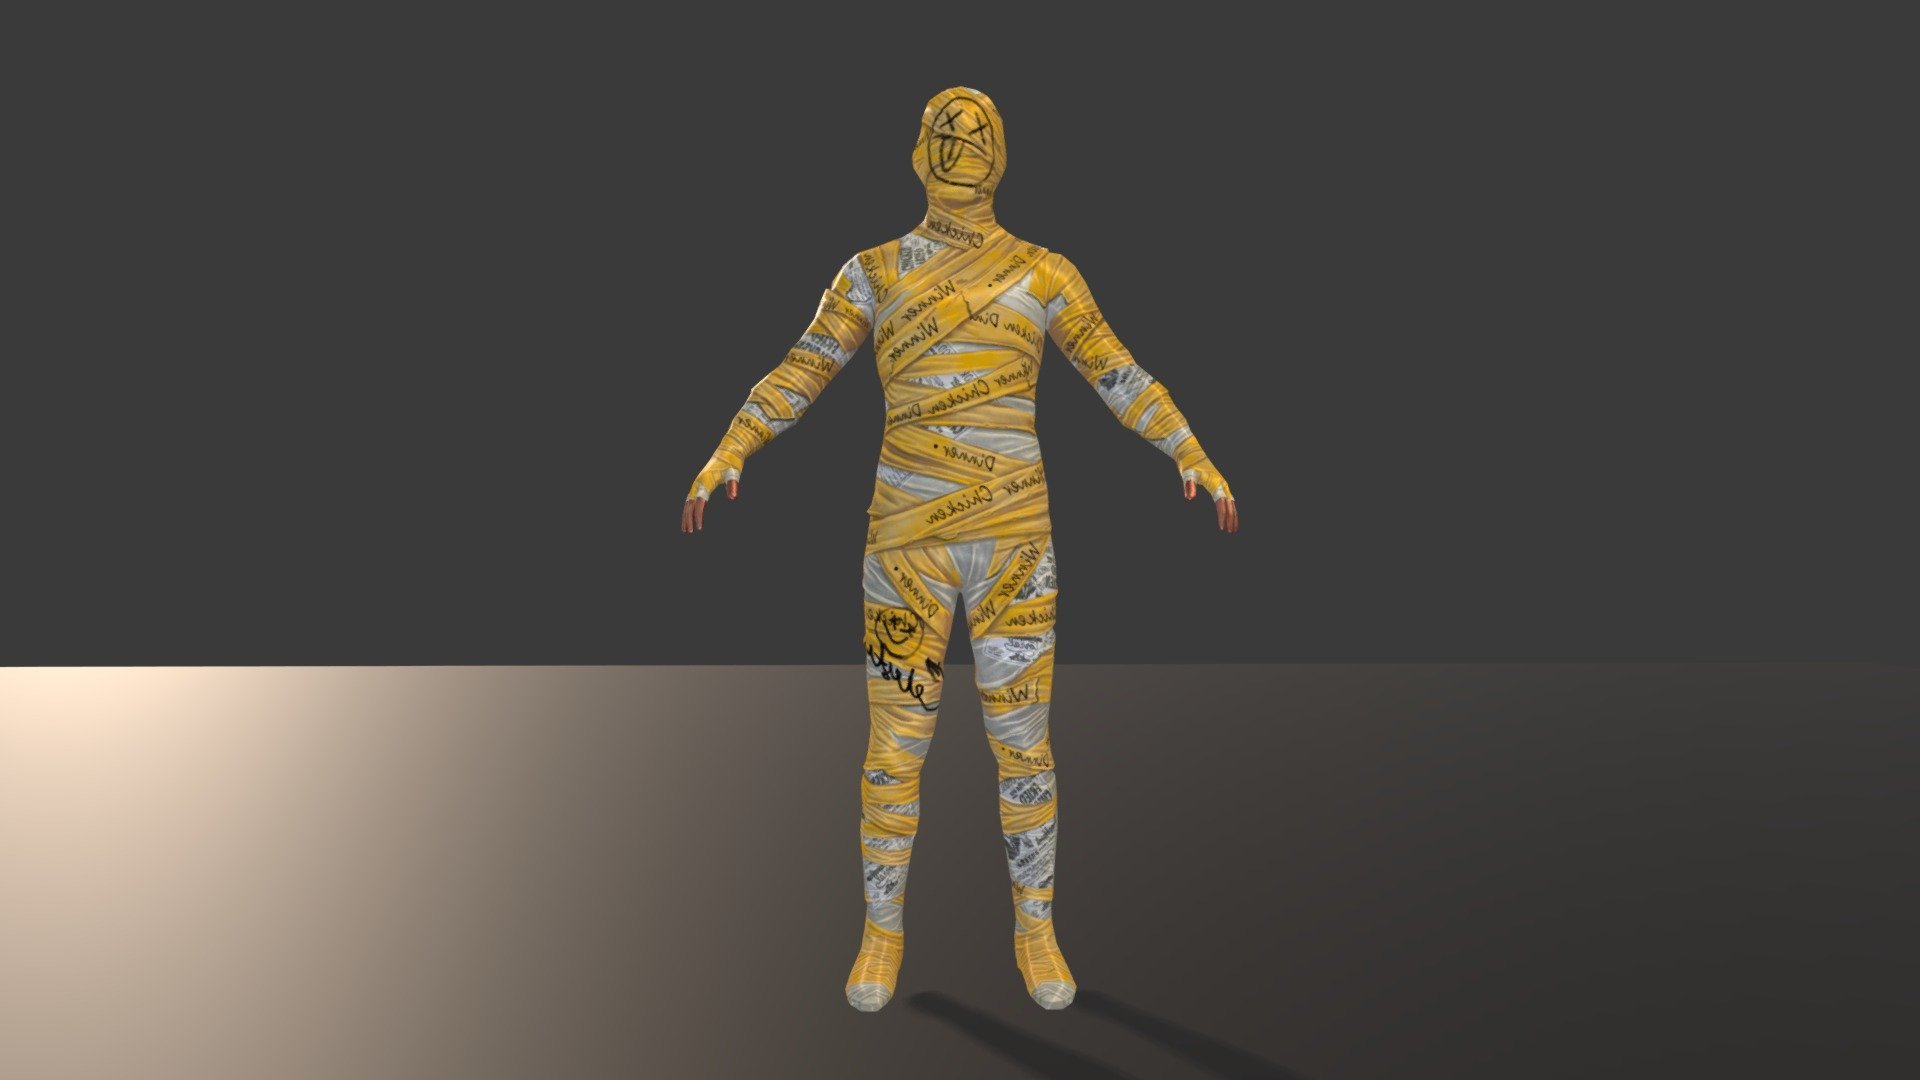 Free download PUBG Mobile Mummy Character Download 3D model by DFLEX [1920x1080] for your Desktop, Mobile & Tablet. Explore PUBG Mummy Wallpaper. Mummy Wallpaper, The Mummy Wallpaper, Pubg Wallpaper